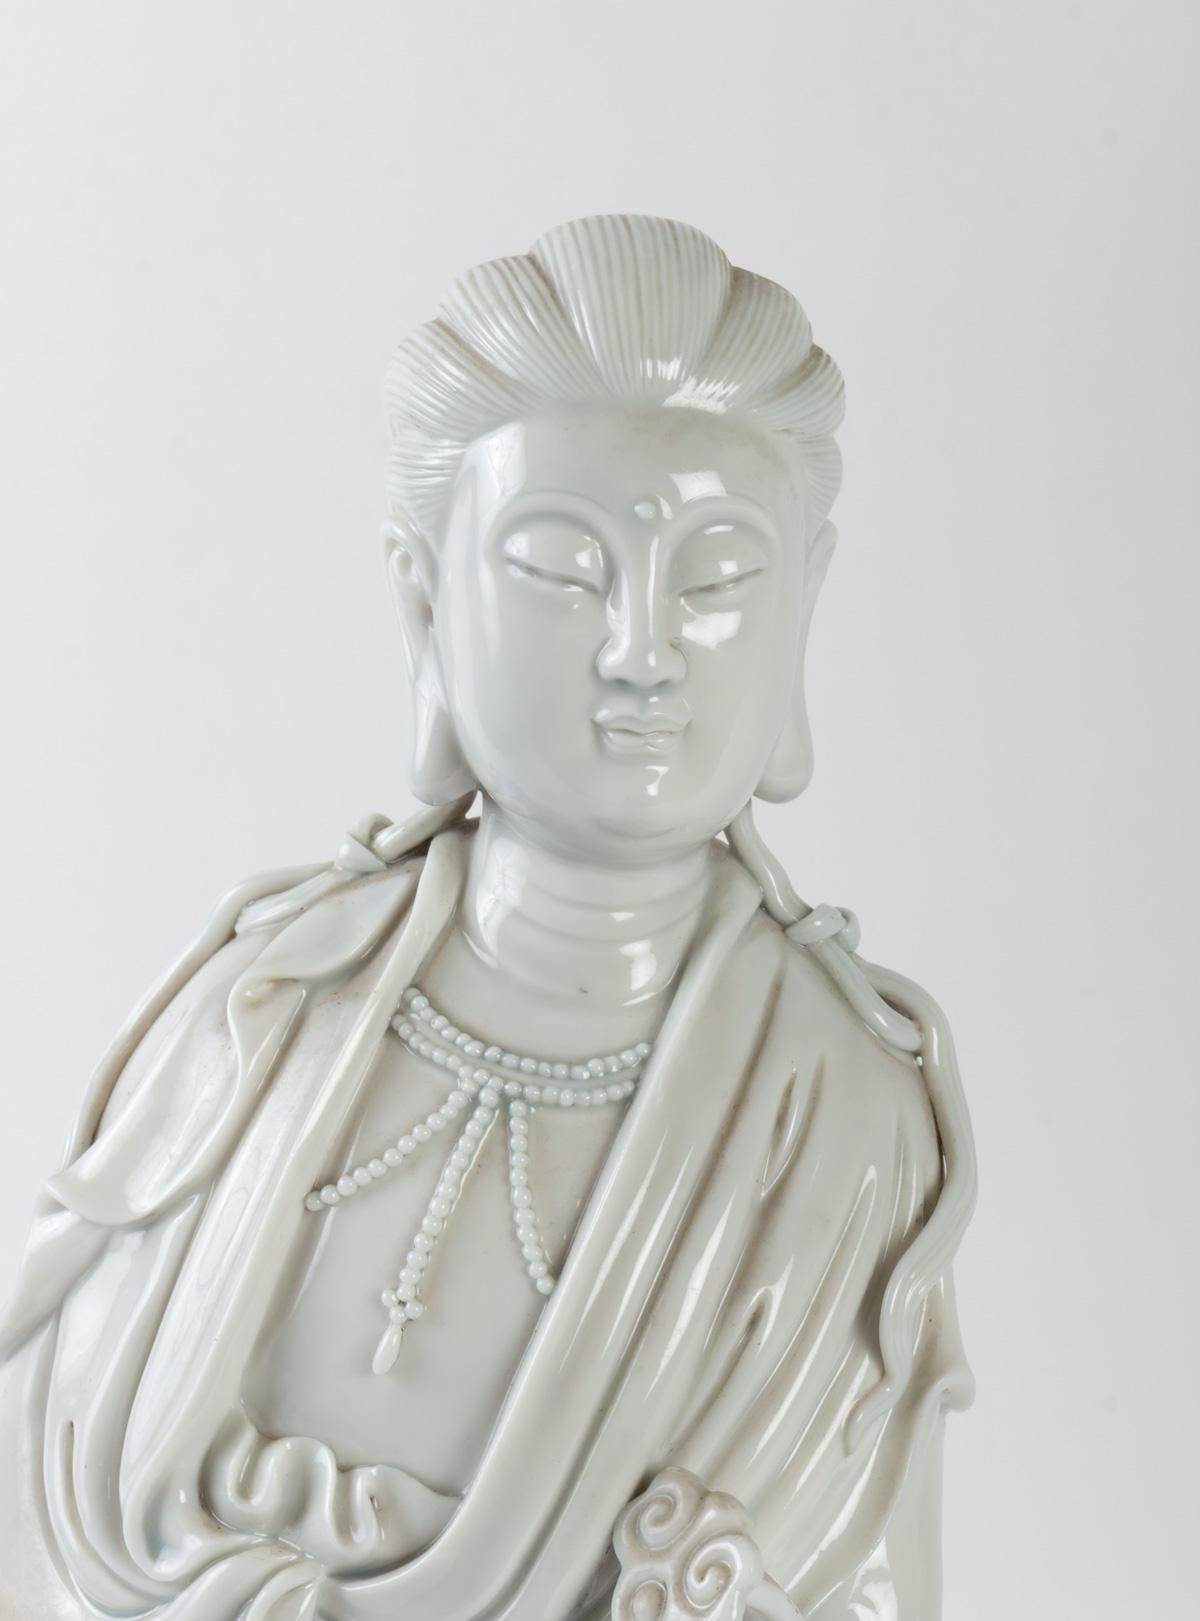 Guanyin holding a scepter in one hand and a porcelain lotus leaf basket in the other. White China.
Double mark on the back.
Perfect condition.
Measures: H 47 cm, W 18 cm, L 12 cm.